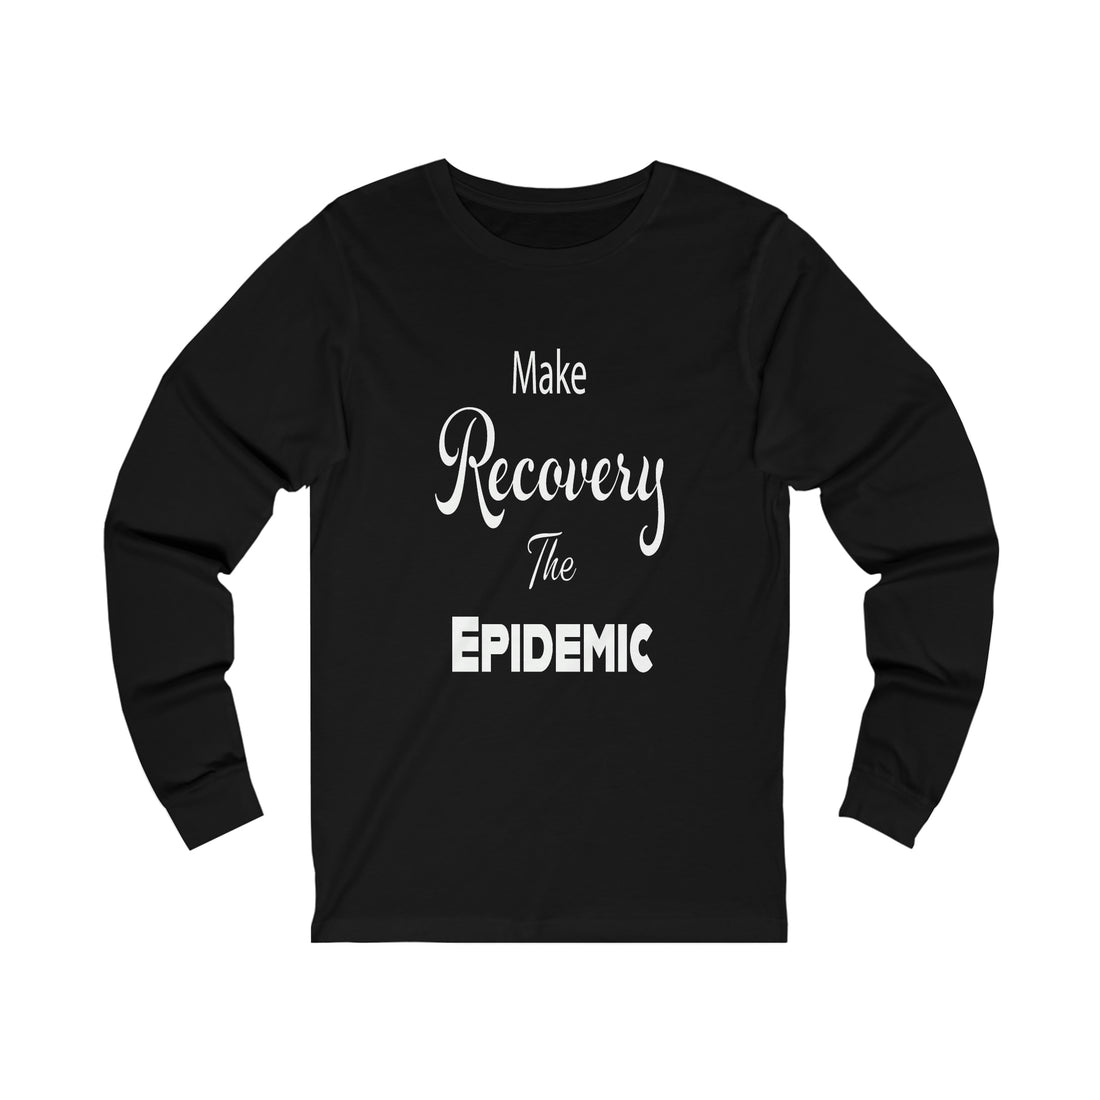 Make Recovery The Epidemic - Unisex Jersey Long Sleeve Tee